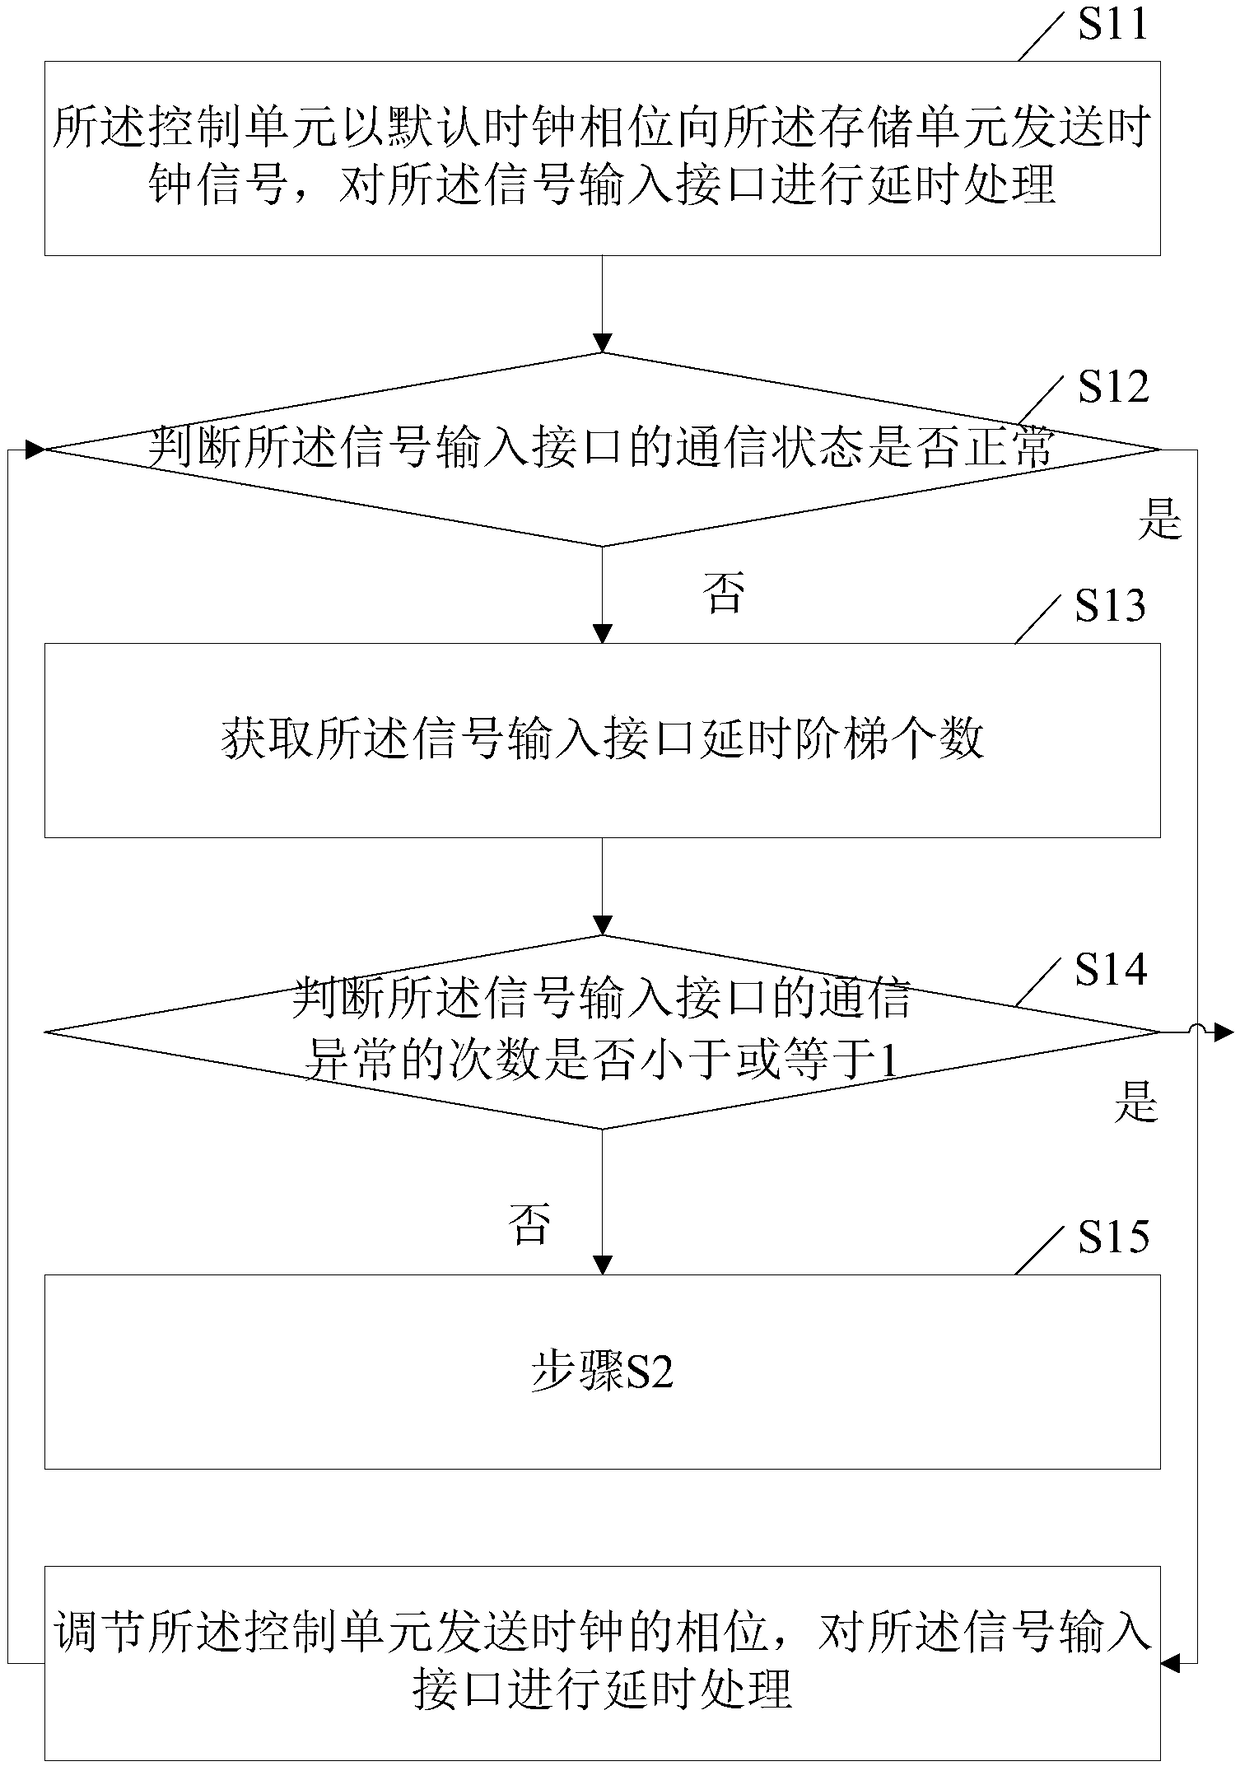 Method and system for obtaining internal time delay step time of storage module